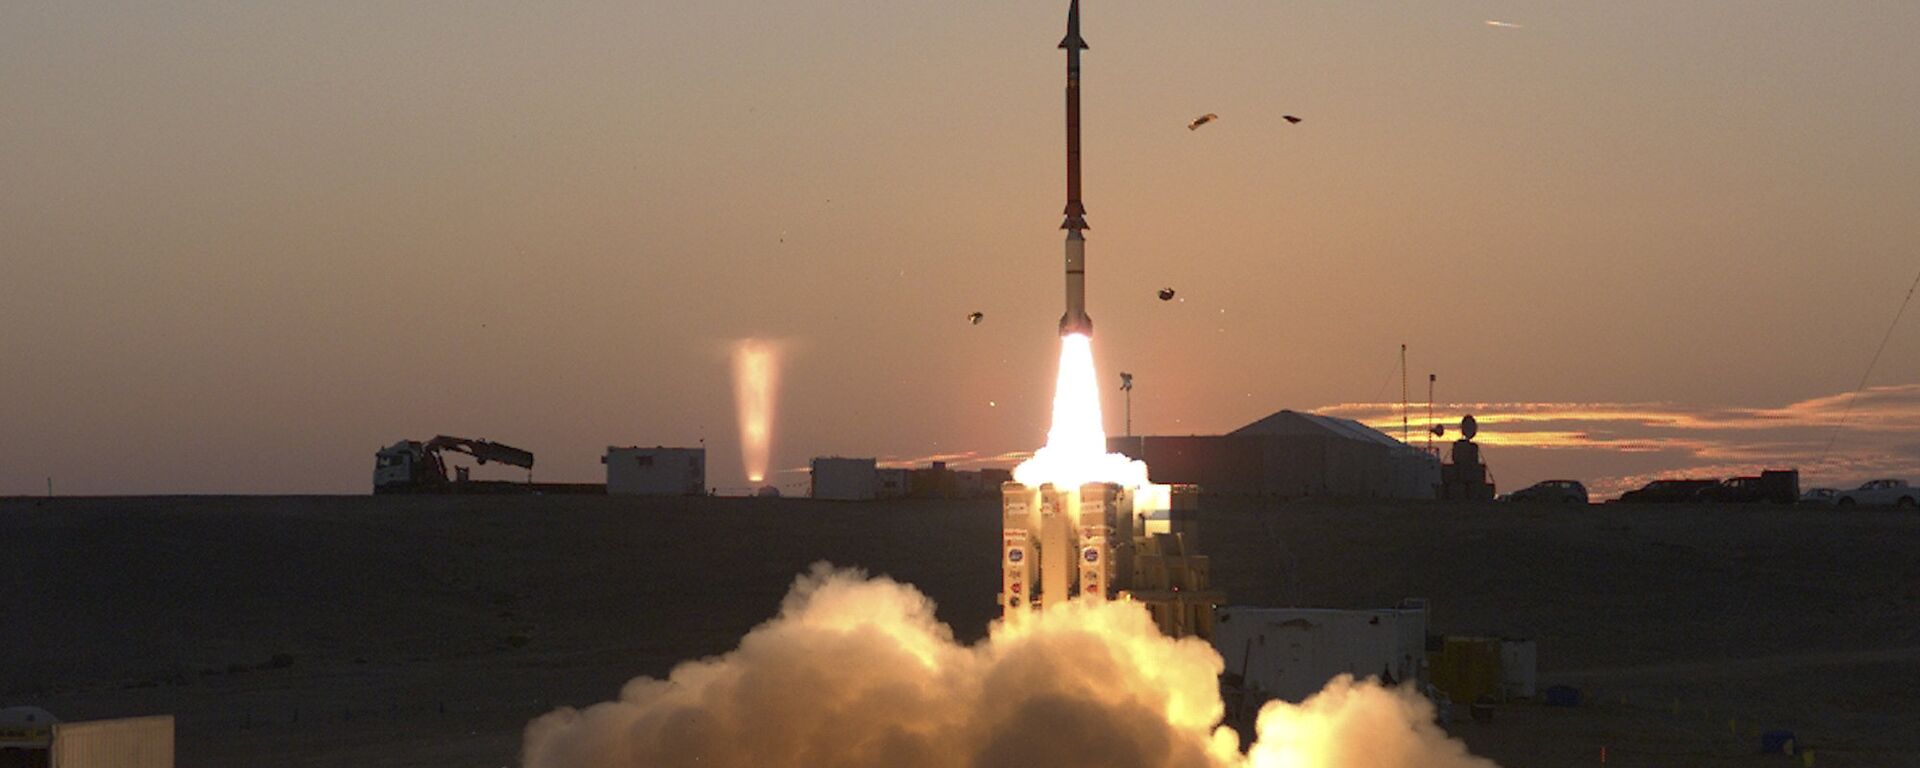 This photograph provided by the Israeli Ministry of Defense on Monday Dec. 21, 2015 shows a launch of David's Sling missile defense system. David's Sling is intended to counter medium-range missiles possessed by enemies throughout the region, most notably the Lebanese Shiite militant group Hezbollah.  - Sputnik International, 1920, 10.04.2023